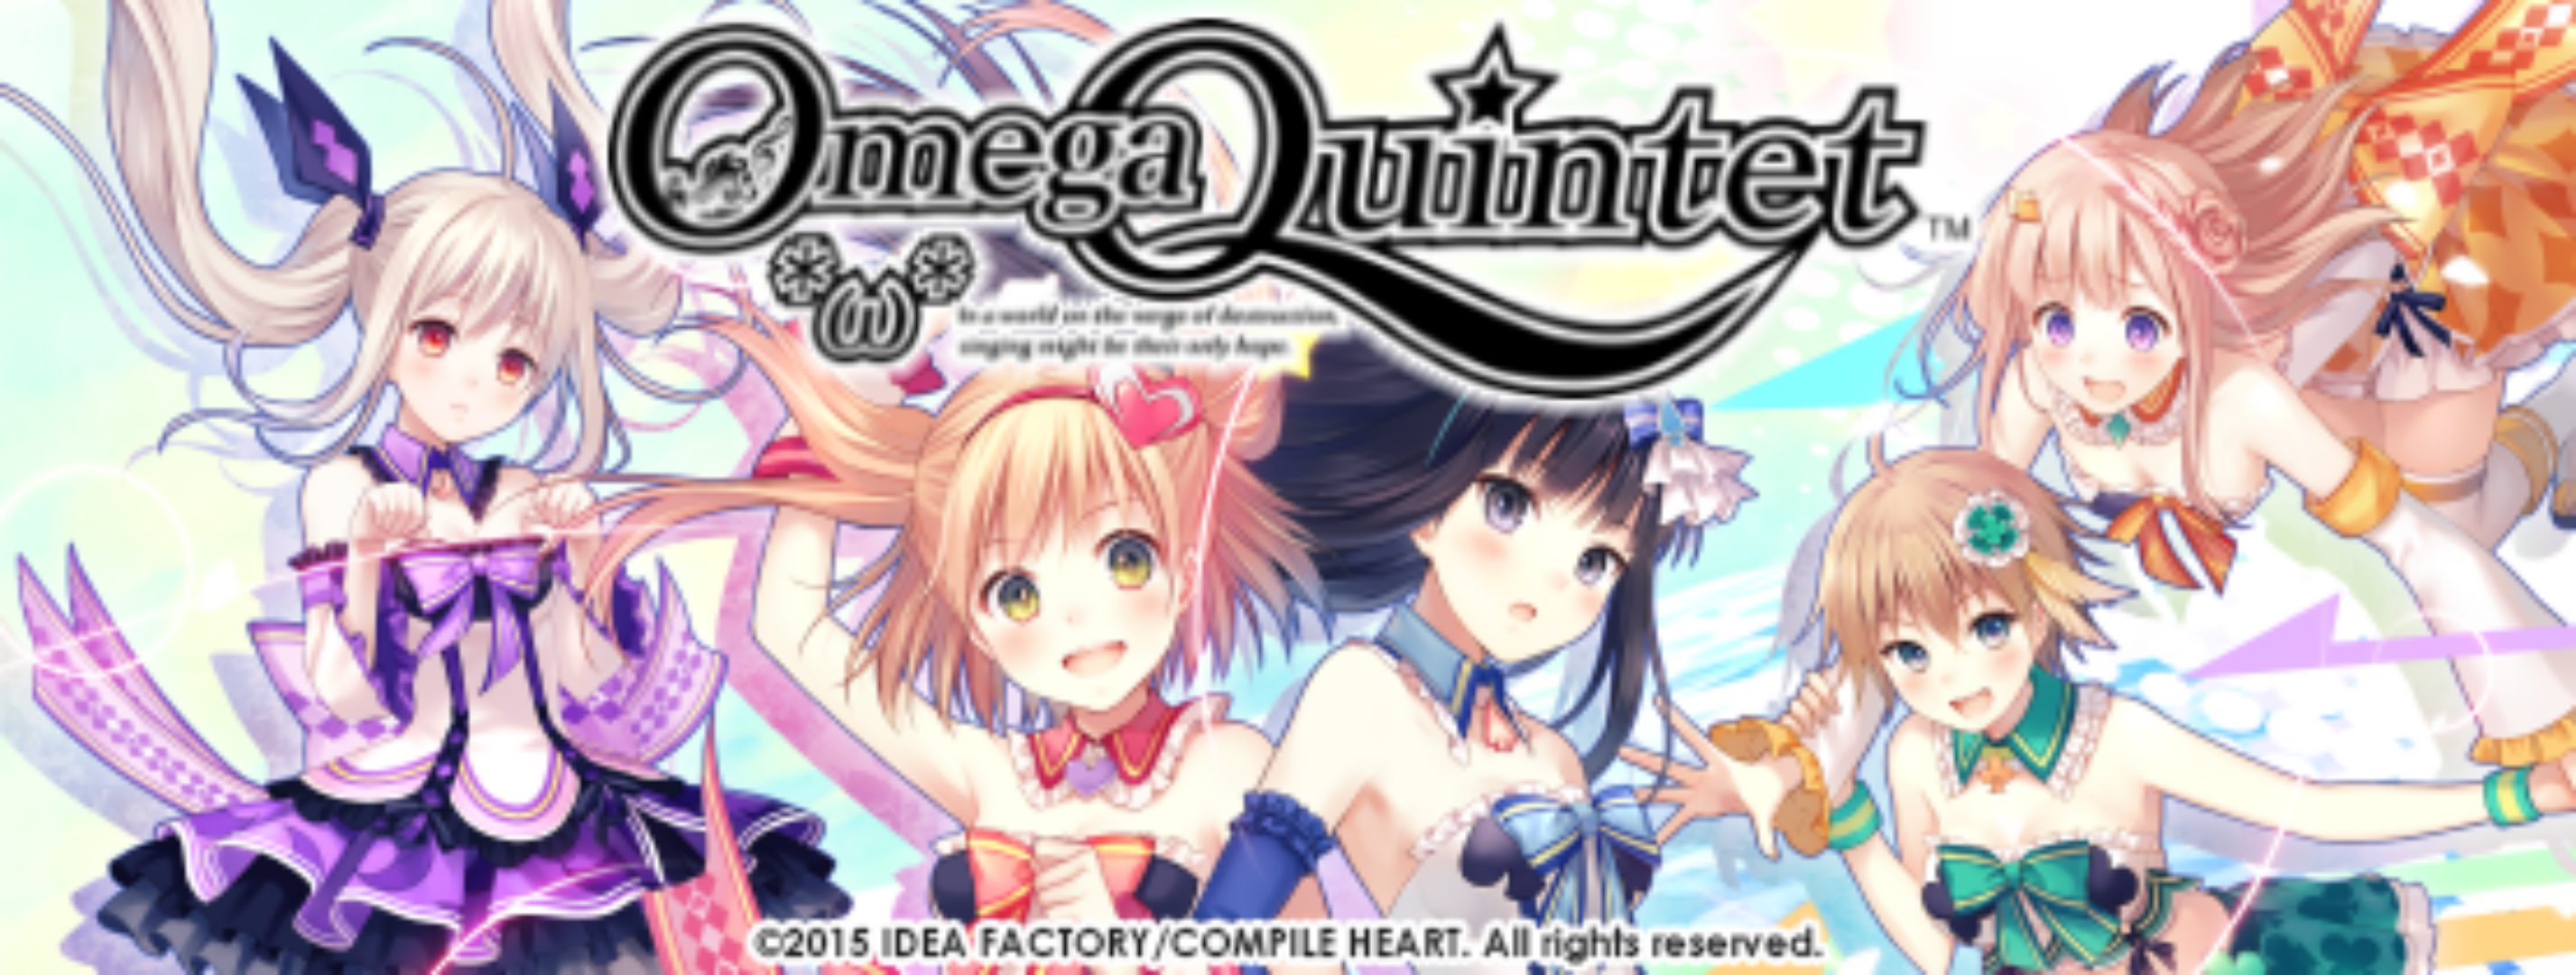 New Screenshots and Trailer for Omega Quintet